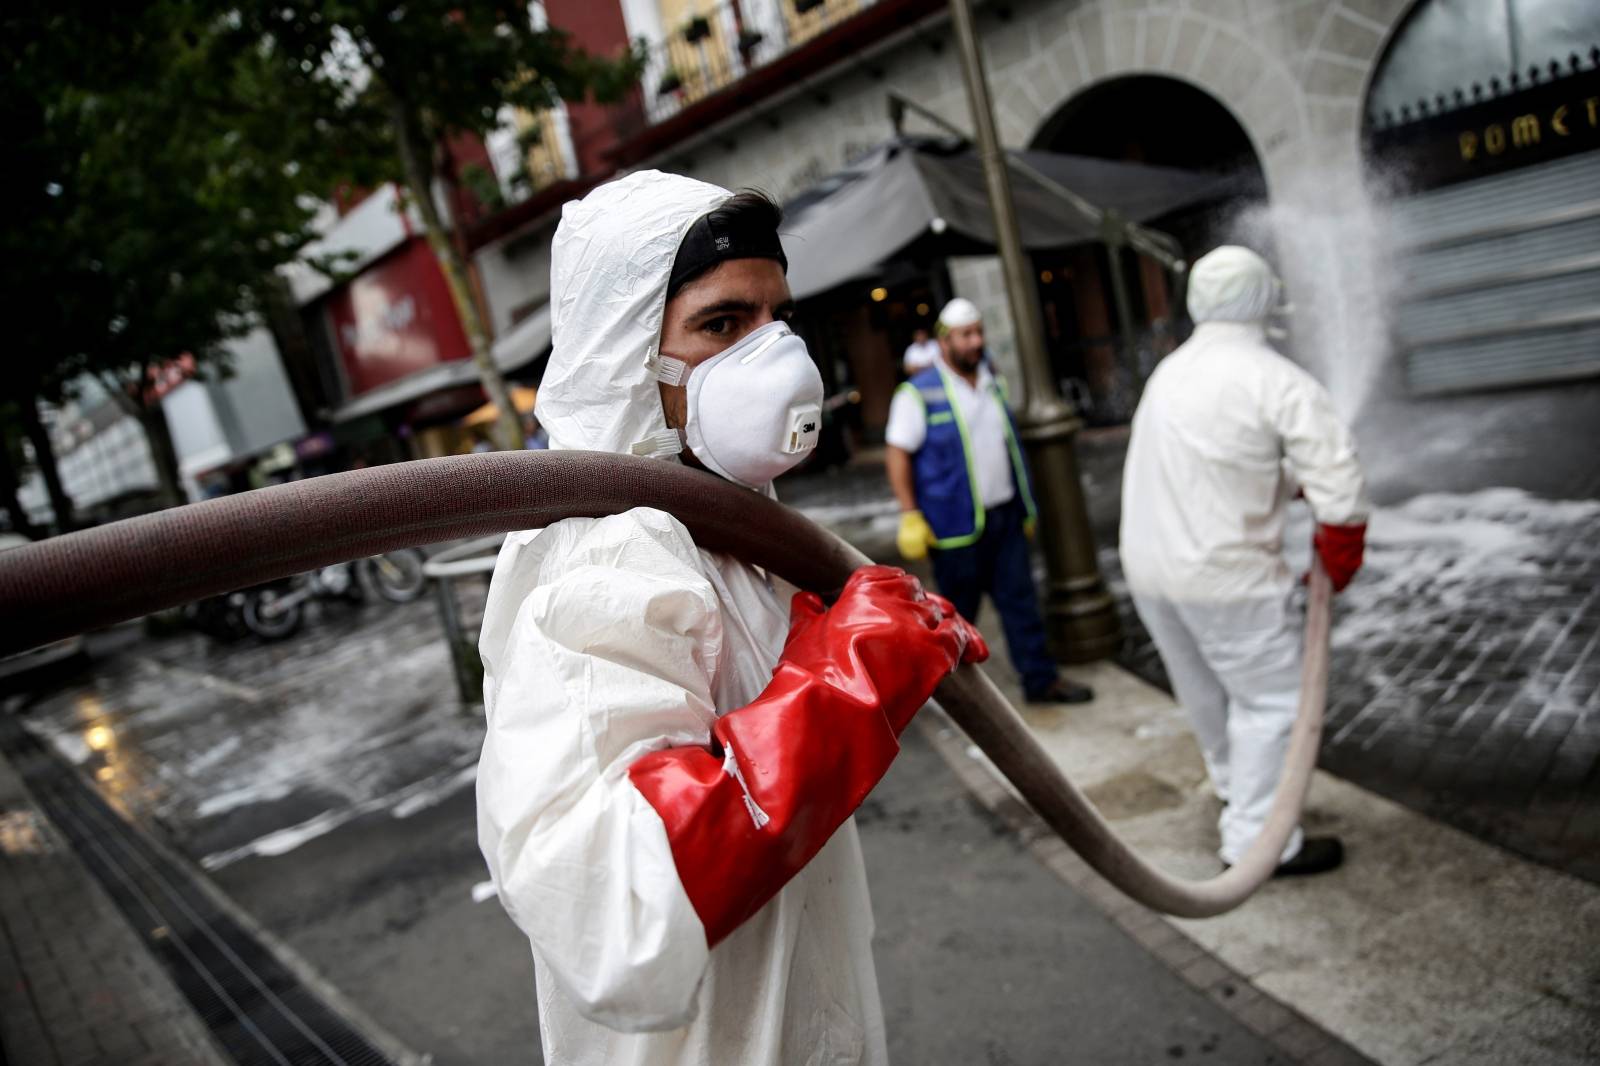 Local workers clean the streets as a precautionary measure, amid the coronavirus disease (COVID-19) outbreak, in Concepcion